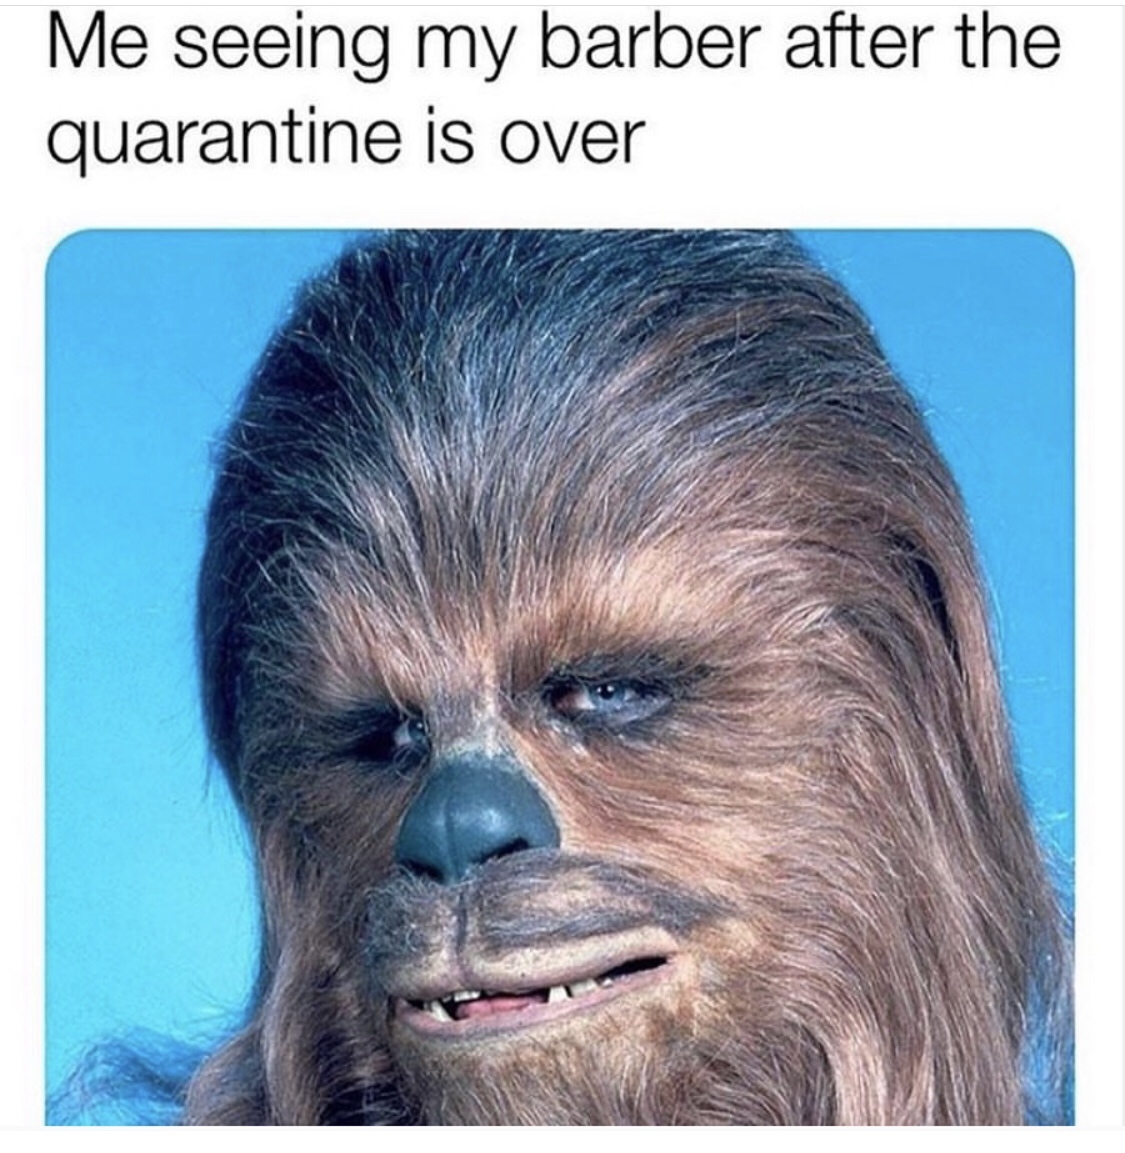 peter mayhew star wars - Me seeing my barber after the quarantine is over